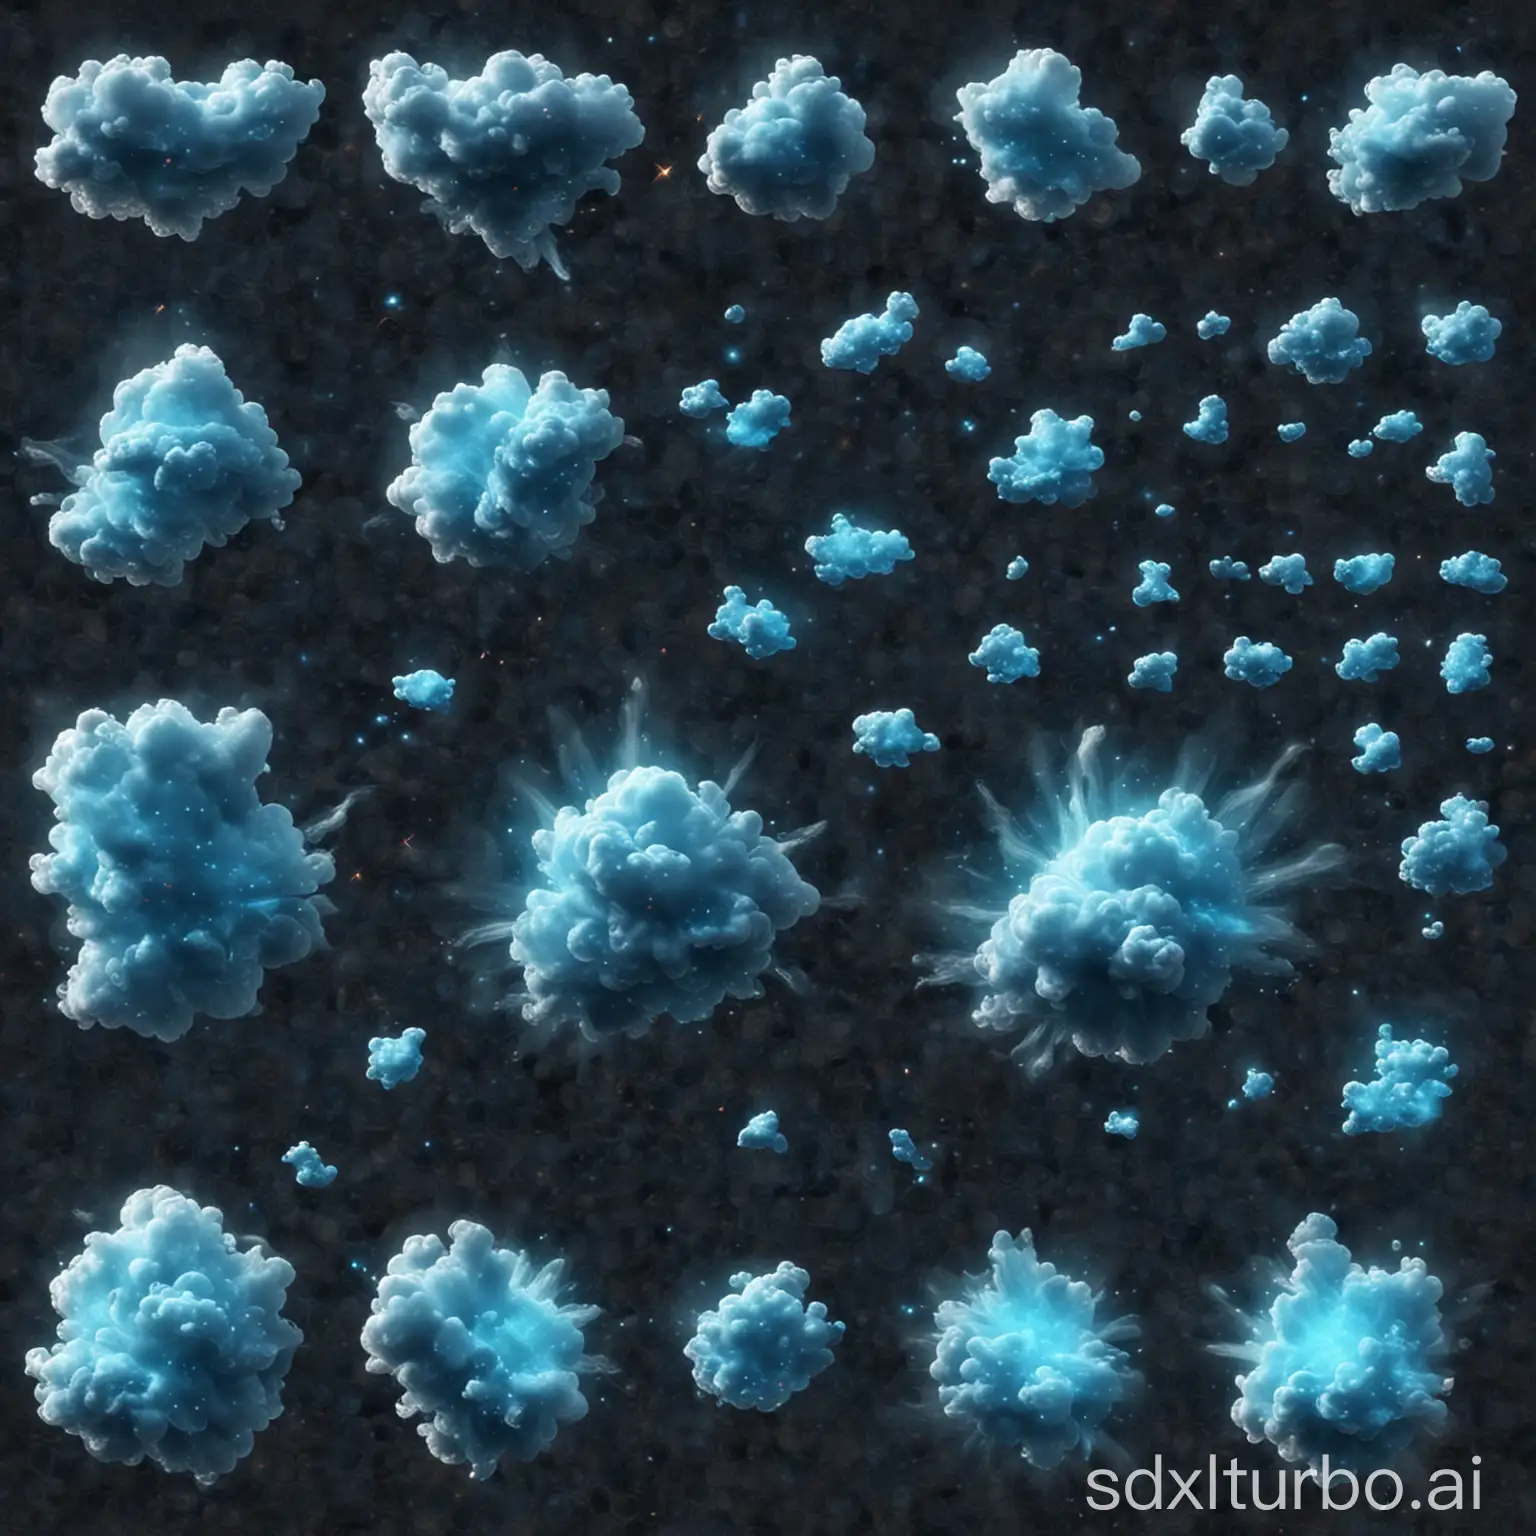 3D-Blue-Transparent-Space-Cloud-Tileset-for-Gaming-Environments